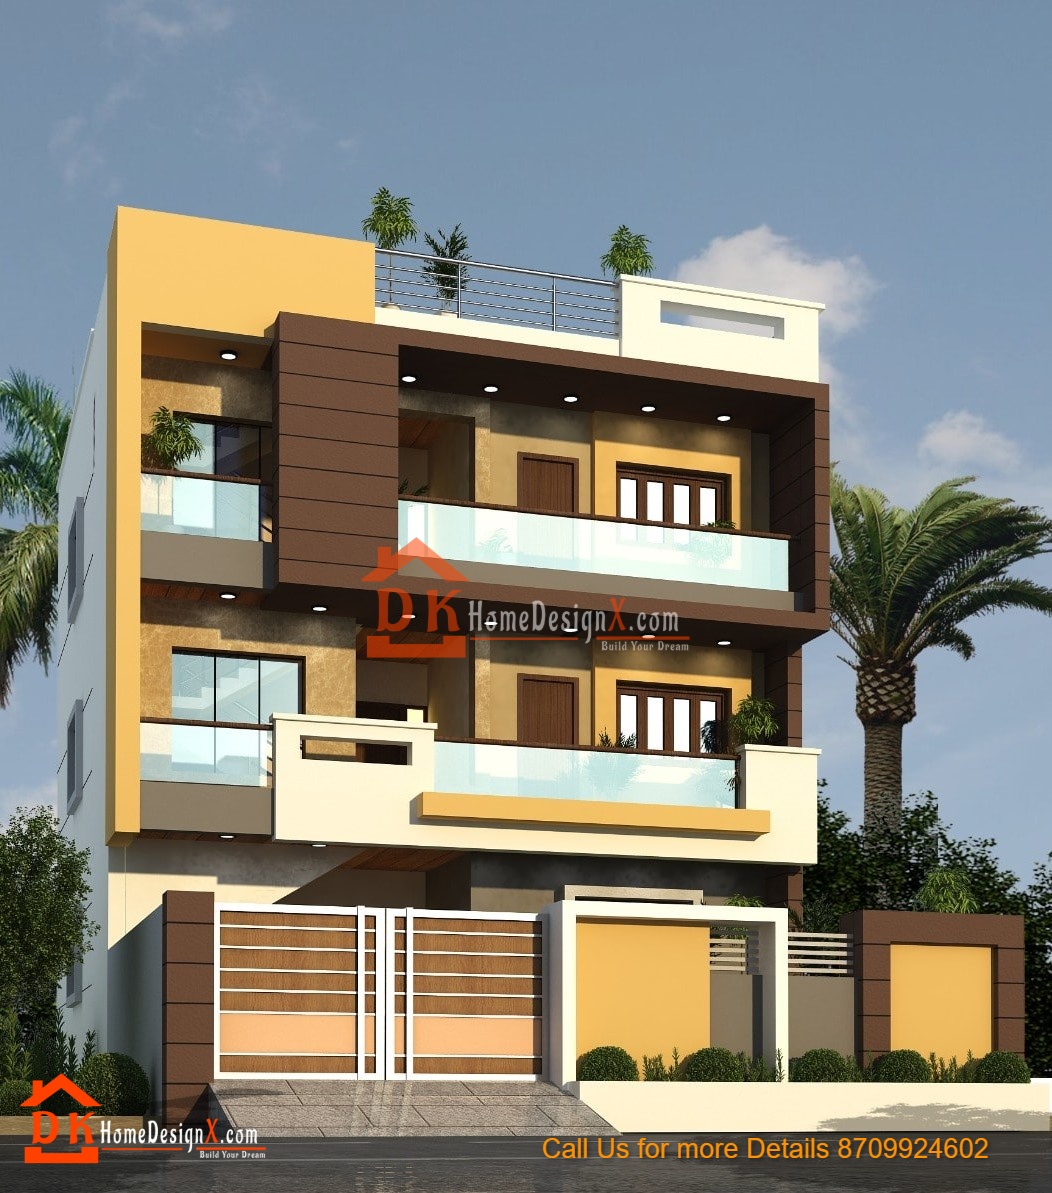 West face g+2  Small house elevation design, 3 storey house